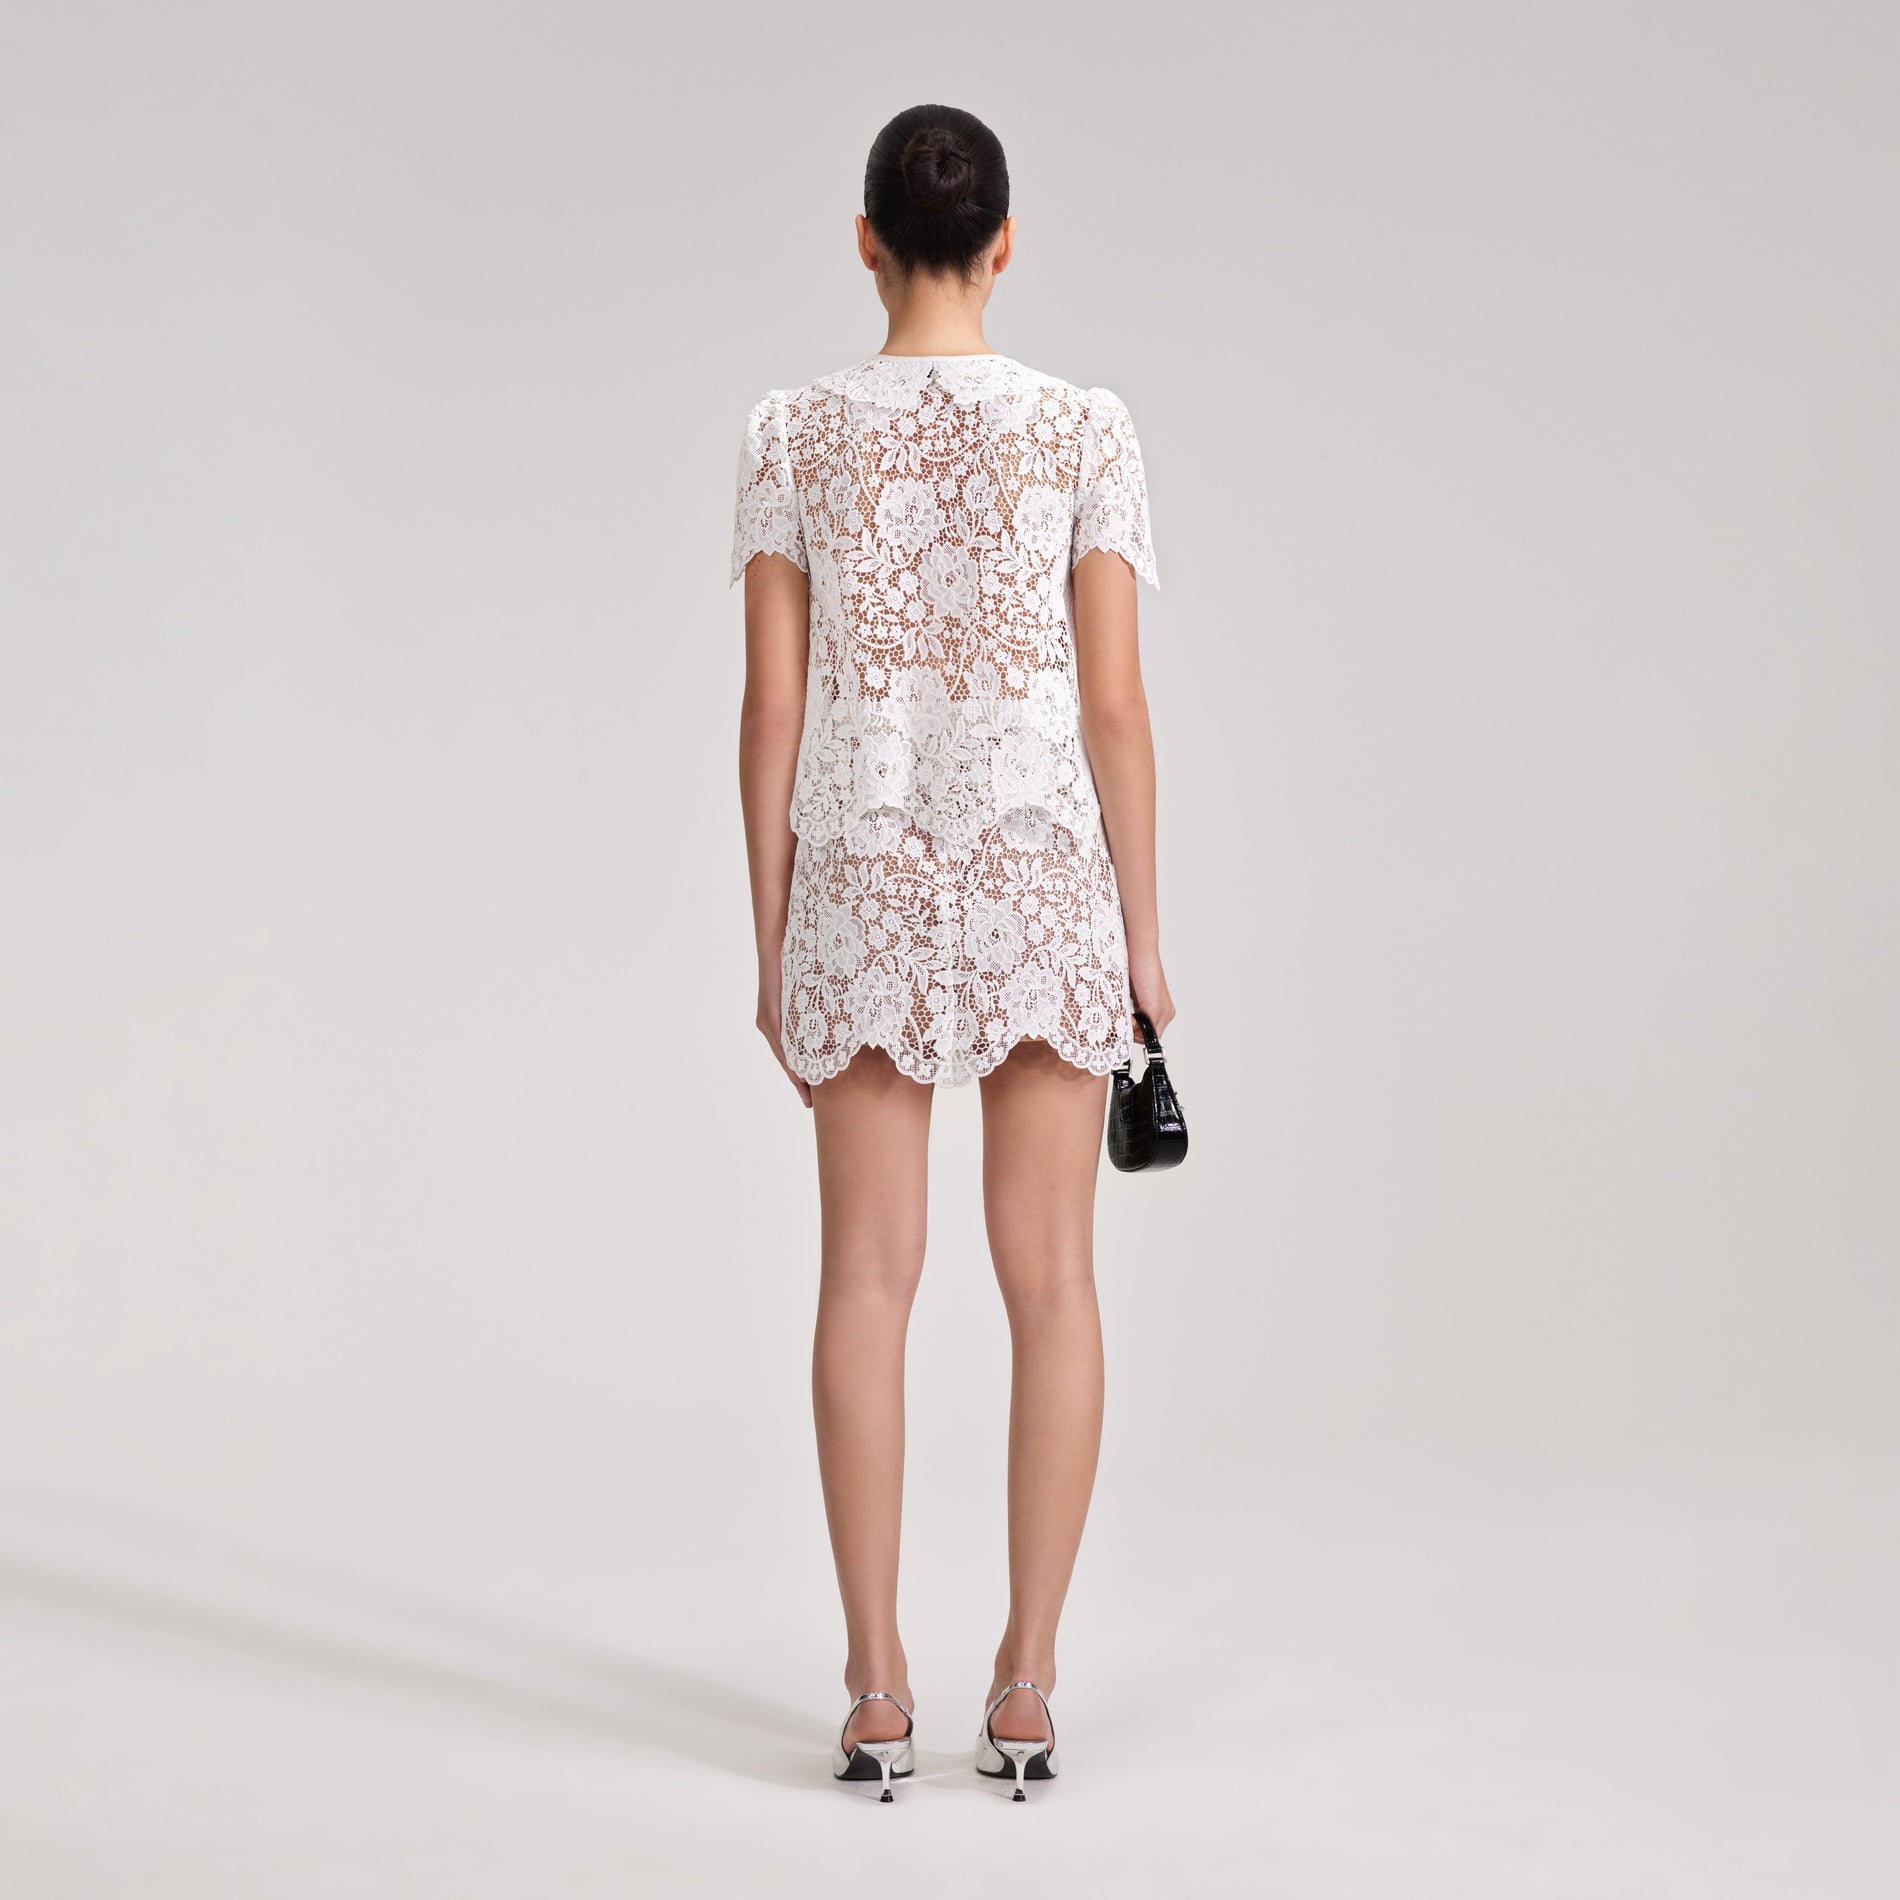 A woman wearing the White Cord Lace Mini Skirt